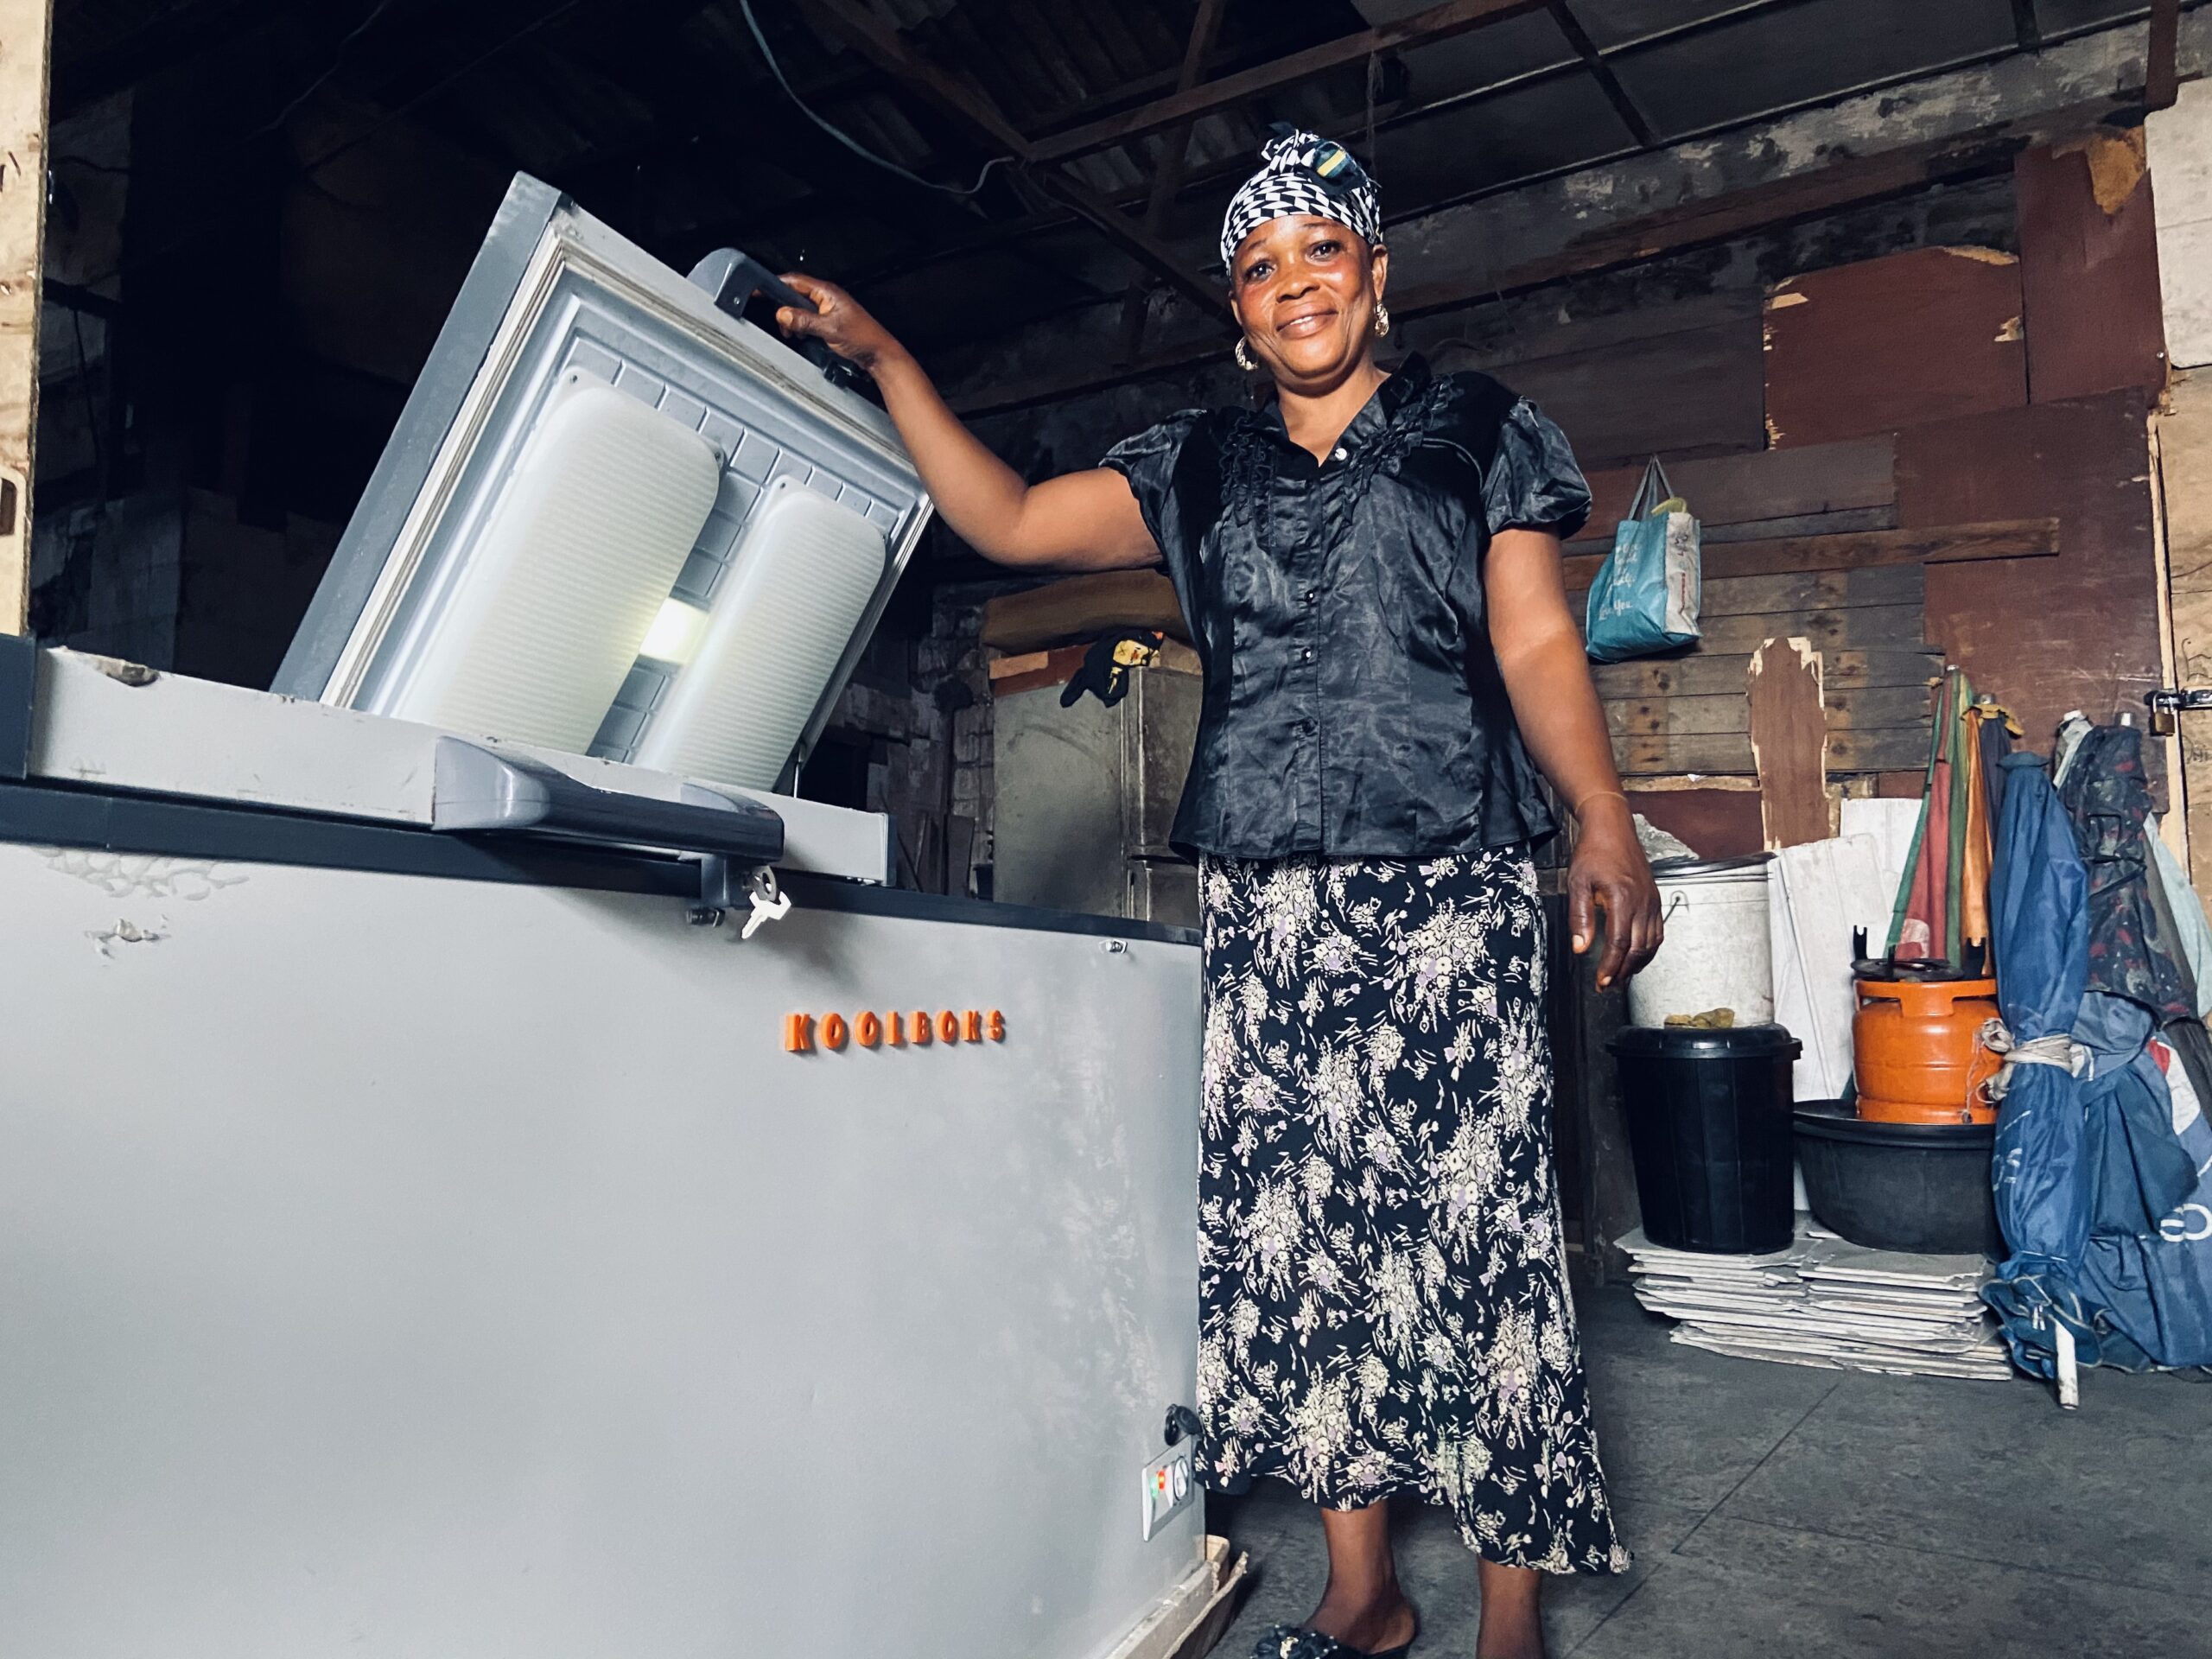 Mama Ibadan, owner of a small shop in Nigeria, uses a Koolboks solar powered refrigerator to preserve her products through power outages